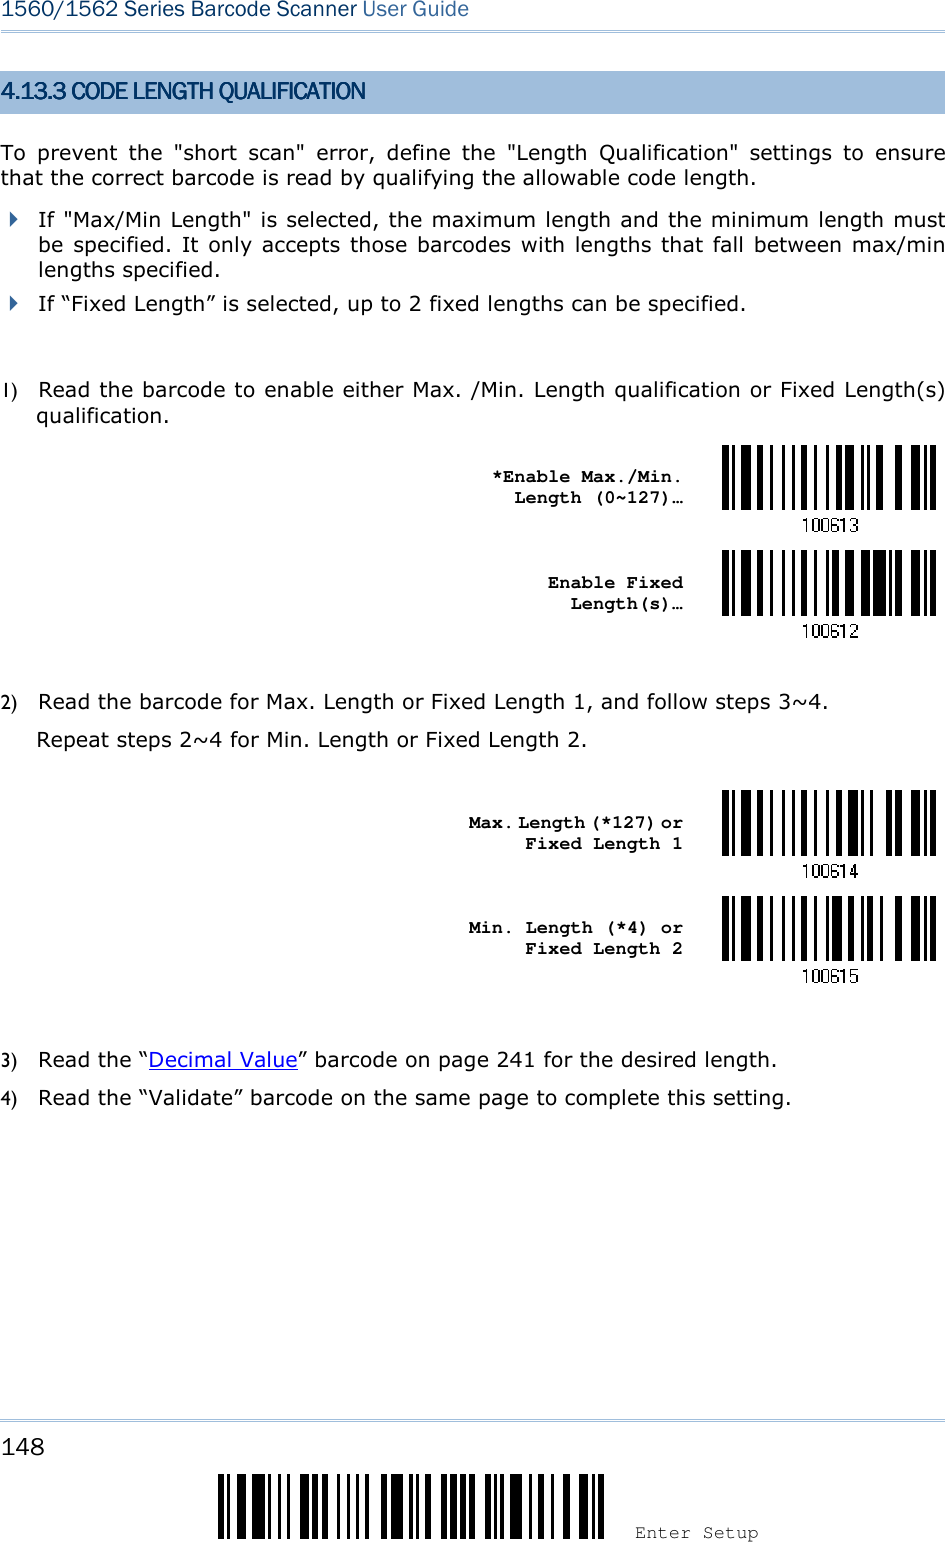 148 Enter Setup 1560/1562 Series Barcode Scanner User Guide  4.4.4.4.11113333.3 CODE LENGTH QUALI.3 CODE LENGTH QUALI.3 CODE LENGTH QUALI.3 CODE LENGTH QUALIFICATIONFICATIONFICATIONFICATION    To  prevent  the  &quot;short  scan&quot;  error,  define  the  &quot;Length  Qualification&quot;  settings  to  ensure that the correct barcode is read by qualifying the allowable code length.    If &quot;Max/Min Length&quot; is selected, the maximum length and the minimum length must be specified.  It only accepts those barcodes with lengths that fall between max/min lengths specified.  If “Fixed Length” is selected, up to 2 fixed lengths can be specified.  1) Read the barcode to enable either Max. /Min. Length qualification or Fixed Length(s) qualification.    *Enable Max./Min. Length (0~127)…     Enable Fixed Length(s)…   2) Read the barcode for Max. Length or Fixed Length 1, and follow steps 3~4. Repeat steps 2~4 for Min. Length or Fixed Length 2.     Max. Length (*127) or Fixed Length 1     Min. Length (*4) or Fixed Length 2   3) Read the “Decimal Value” barcode on page 241 for the desired length.   4) Read the “Validate” barcode on the same page to complete this setting. 